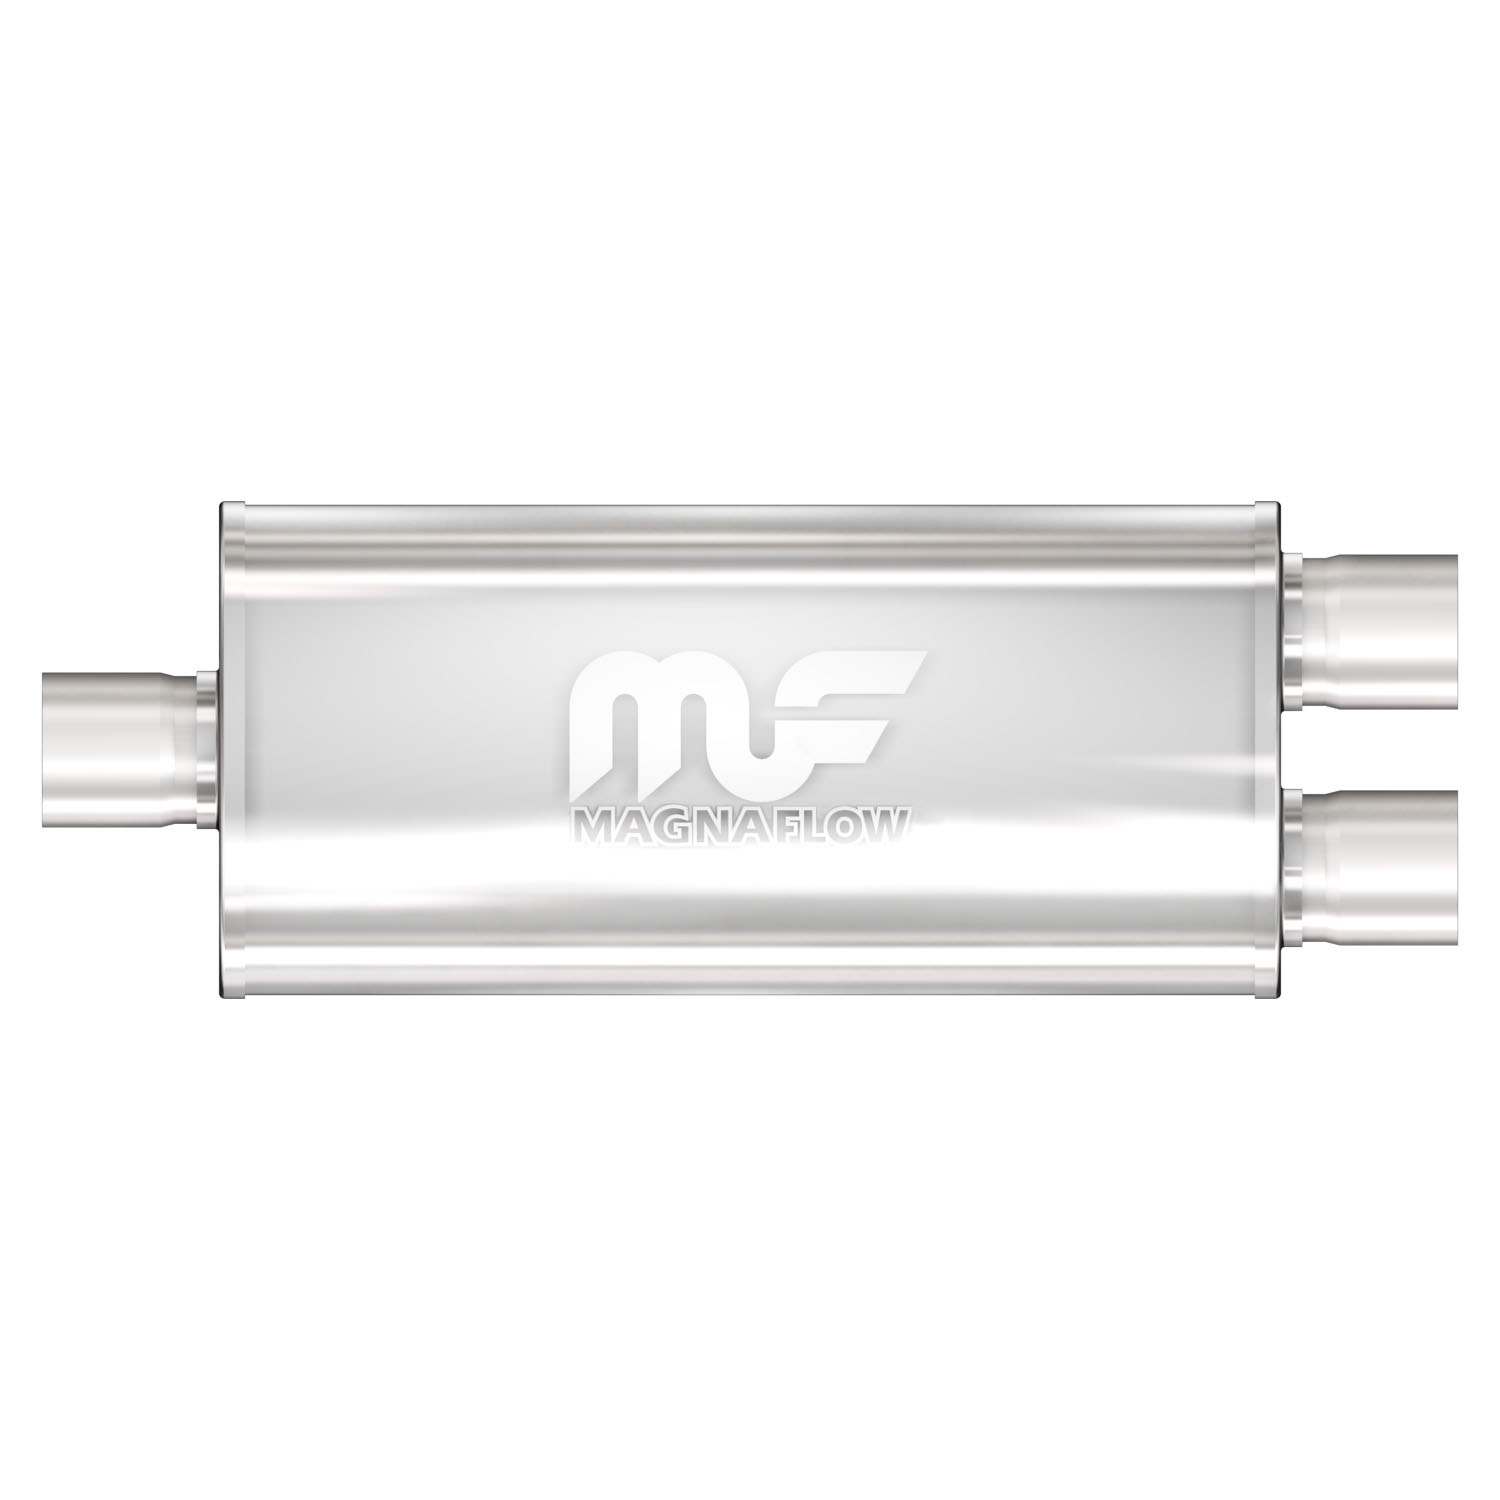 5" x 8" Oval Muffler Center In/Dual Out: 3" /2.5" Body Length: 18" Overall Length: 24" Core Size: 3" Polished Finish